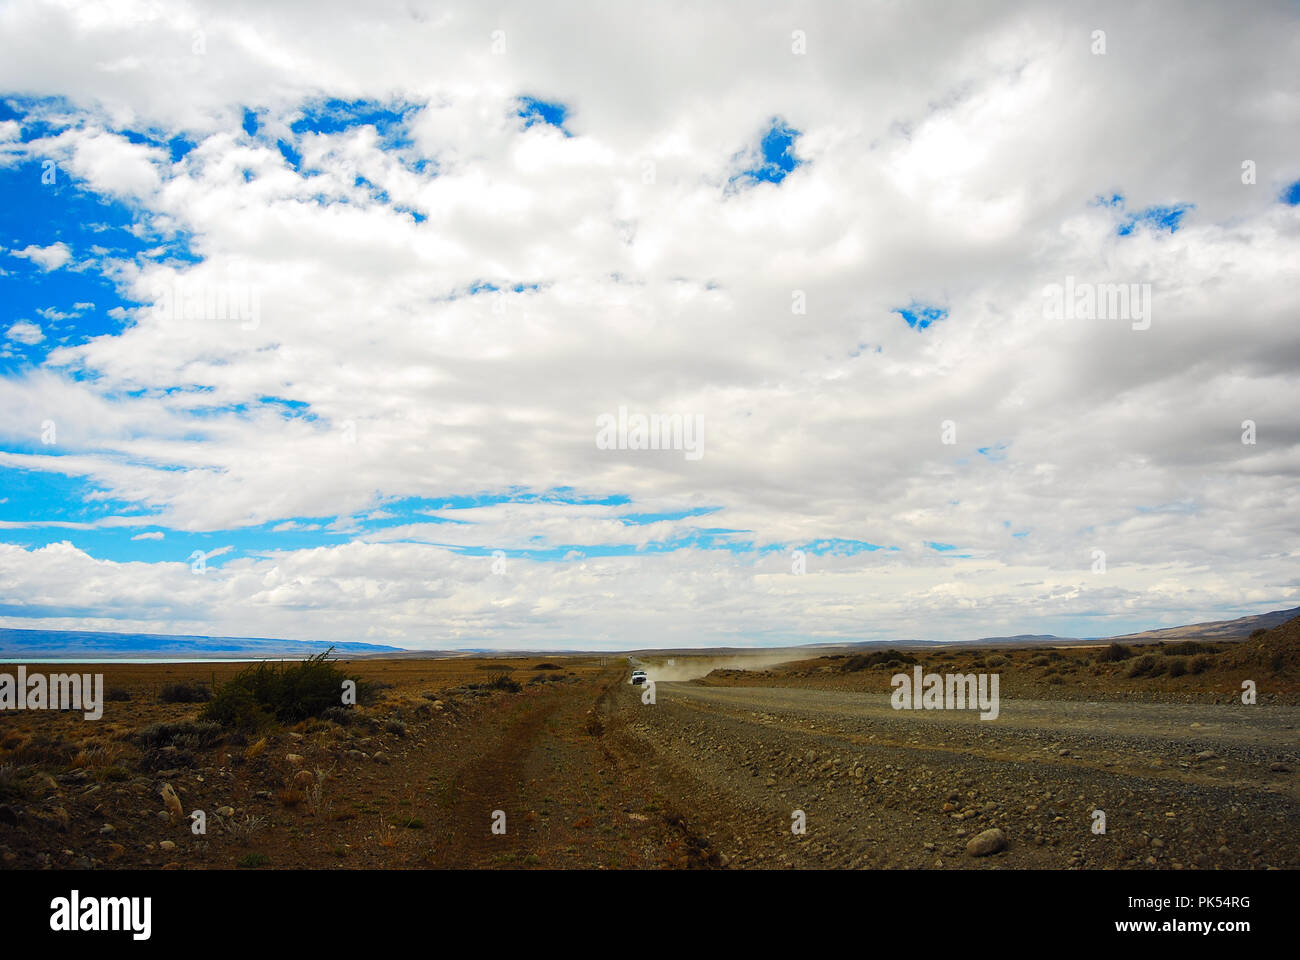 Road to El Calafate from Puerto Madryn Argentina Stock Photo